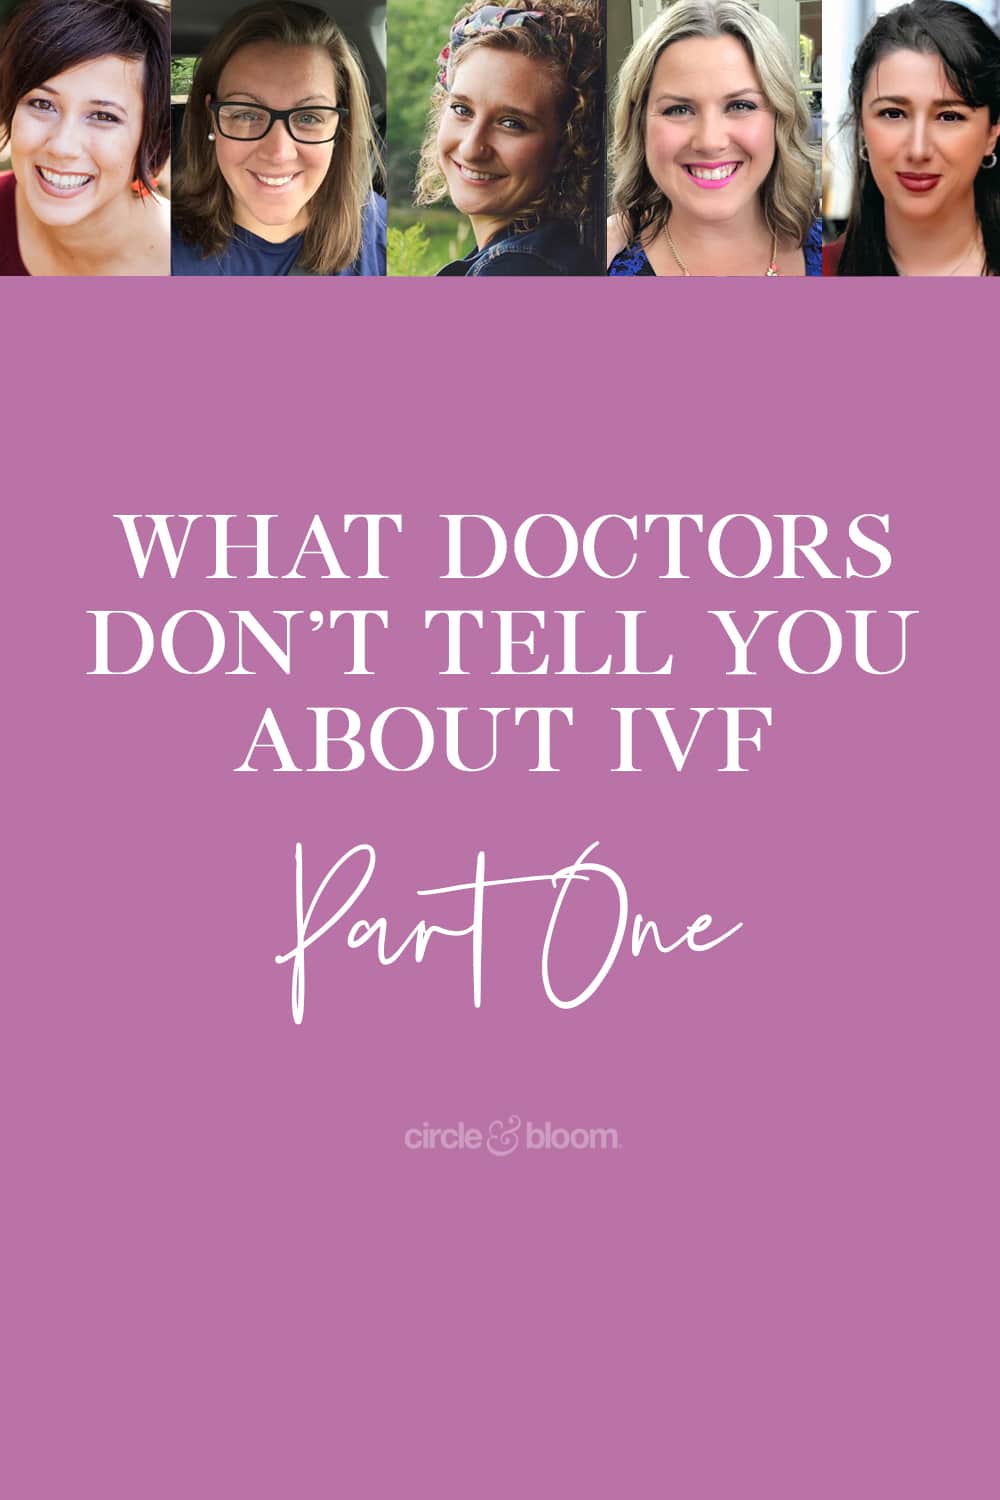 What Doctors Don’t Tell You About IVF [Part 1]